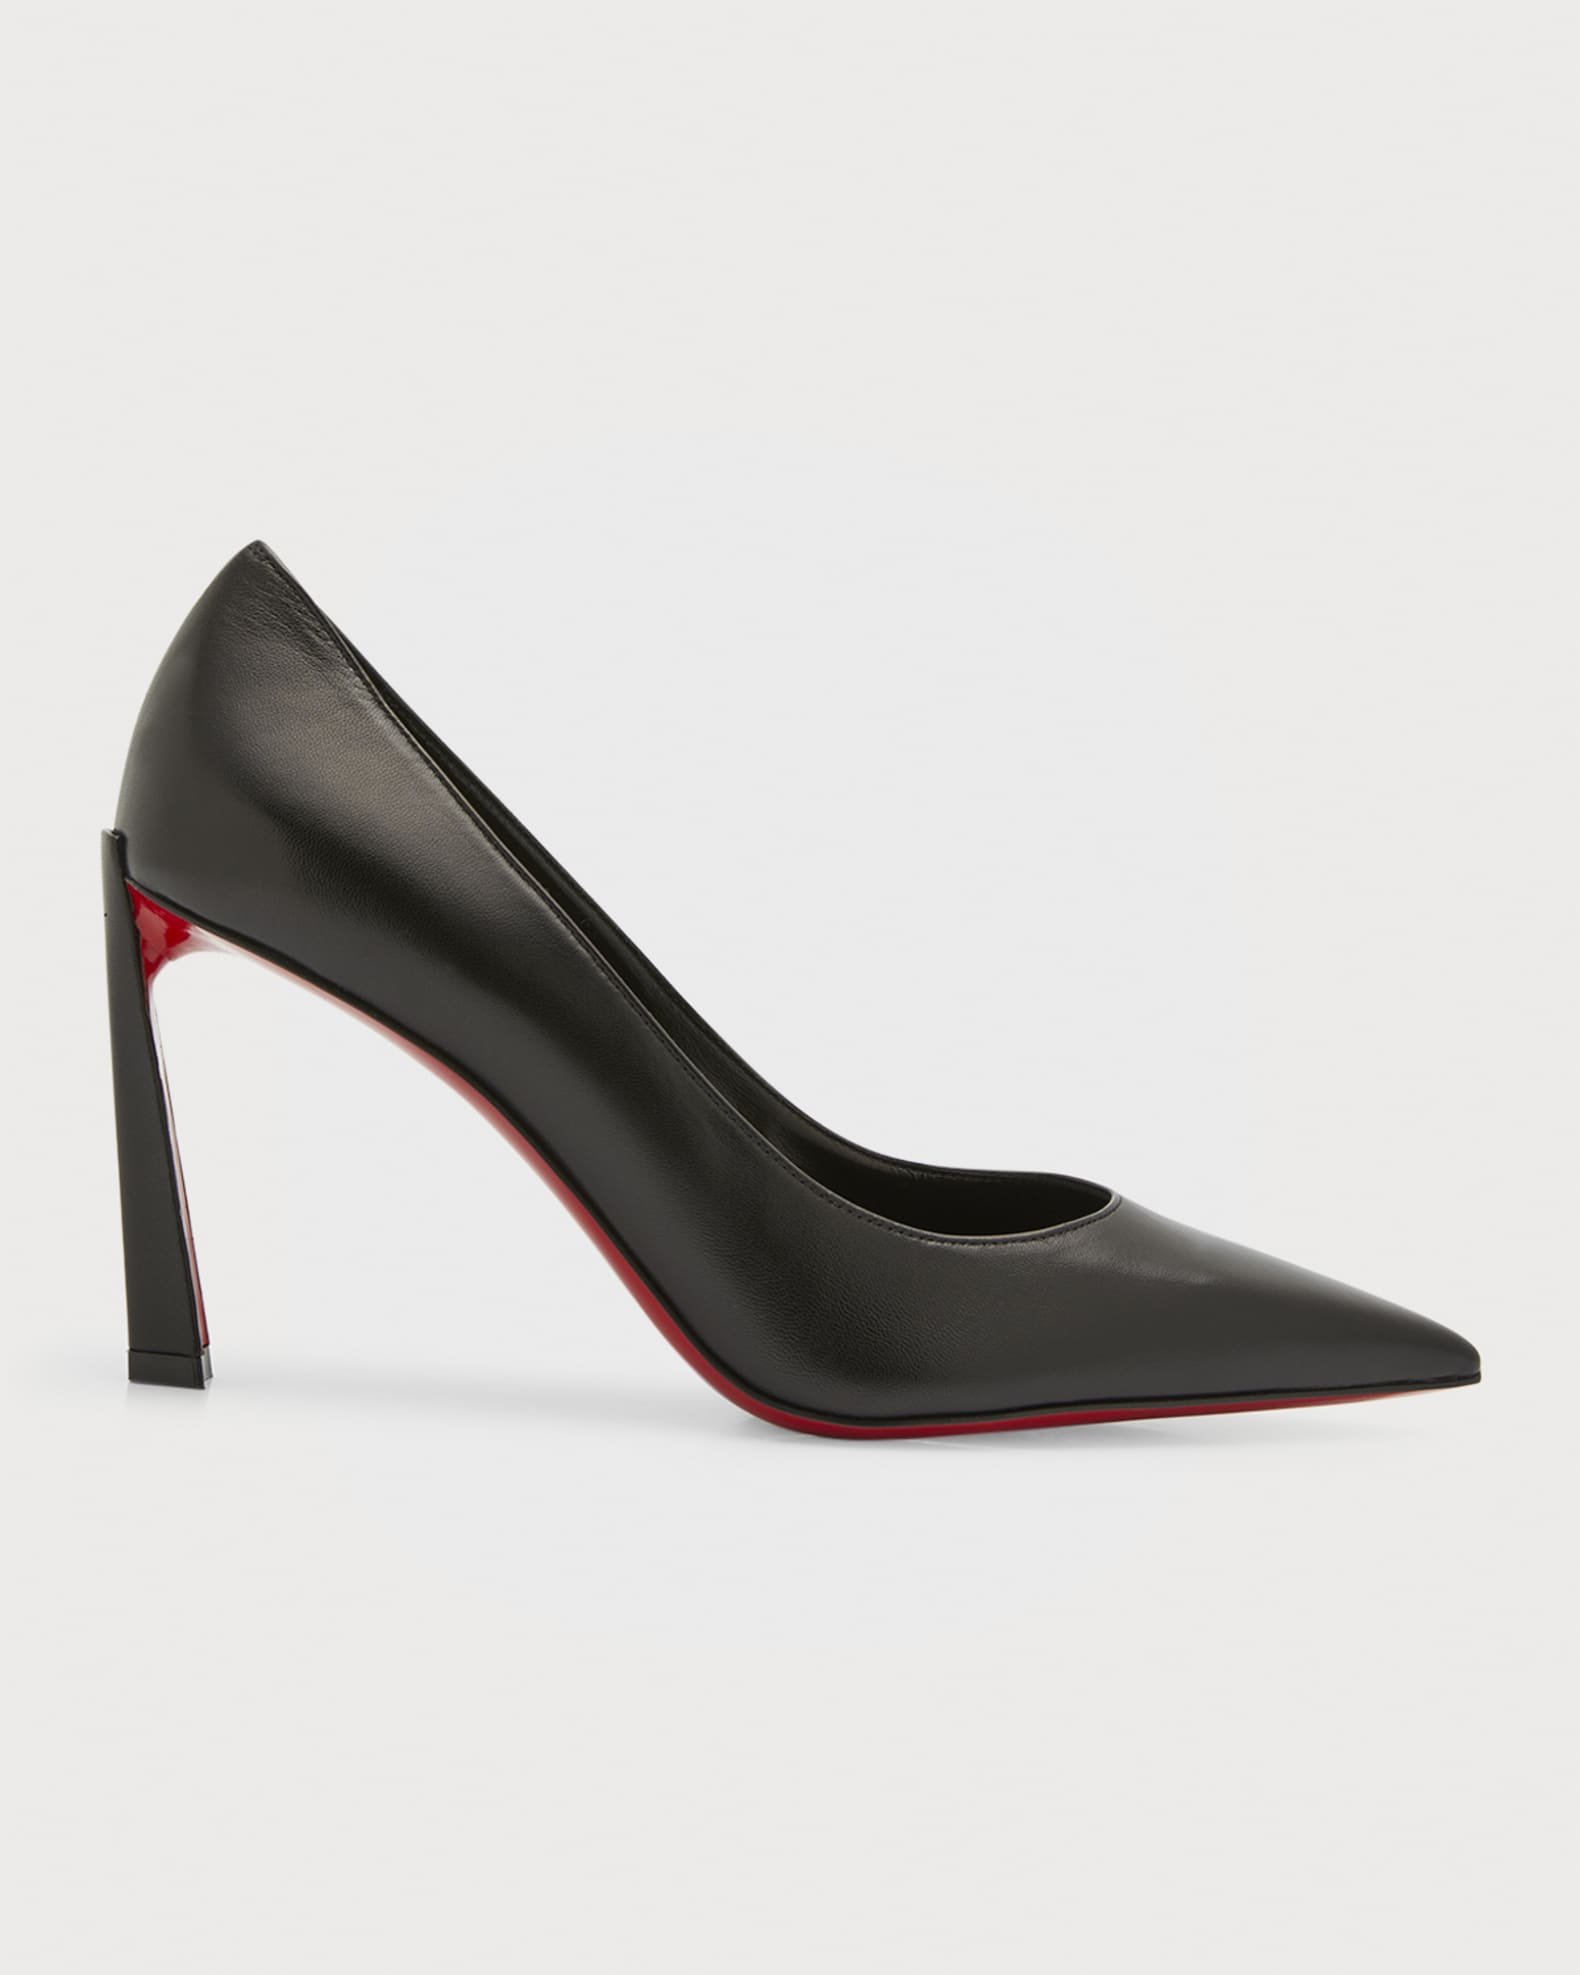 Christian Louboutin Condora Leather Red Sole Pumps | Neiman Marcus